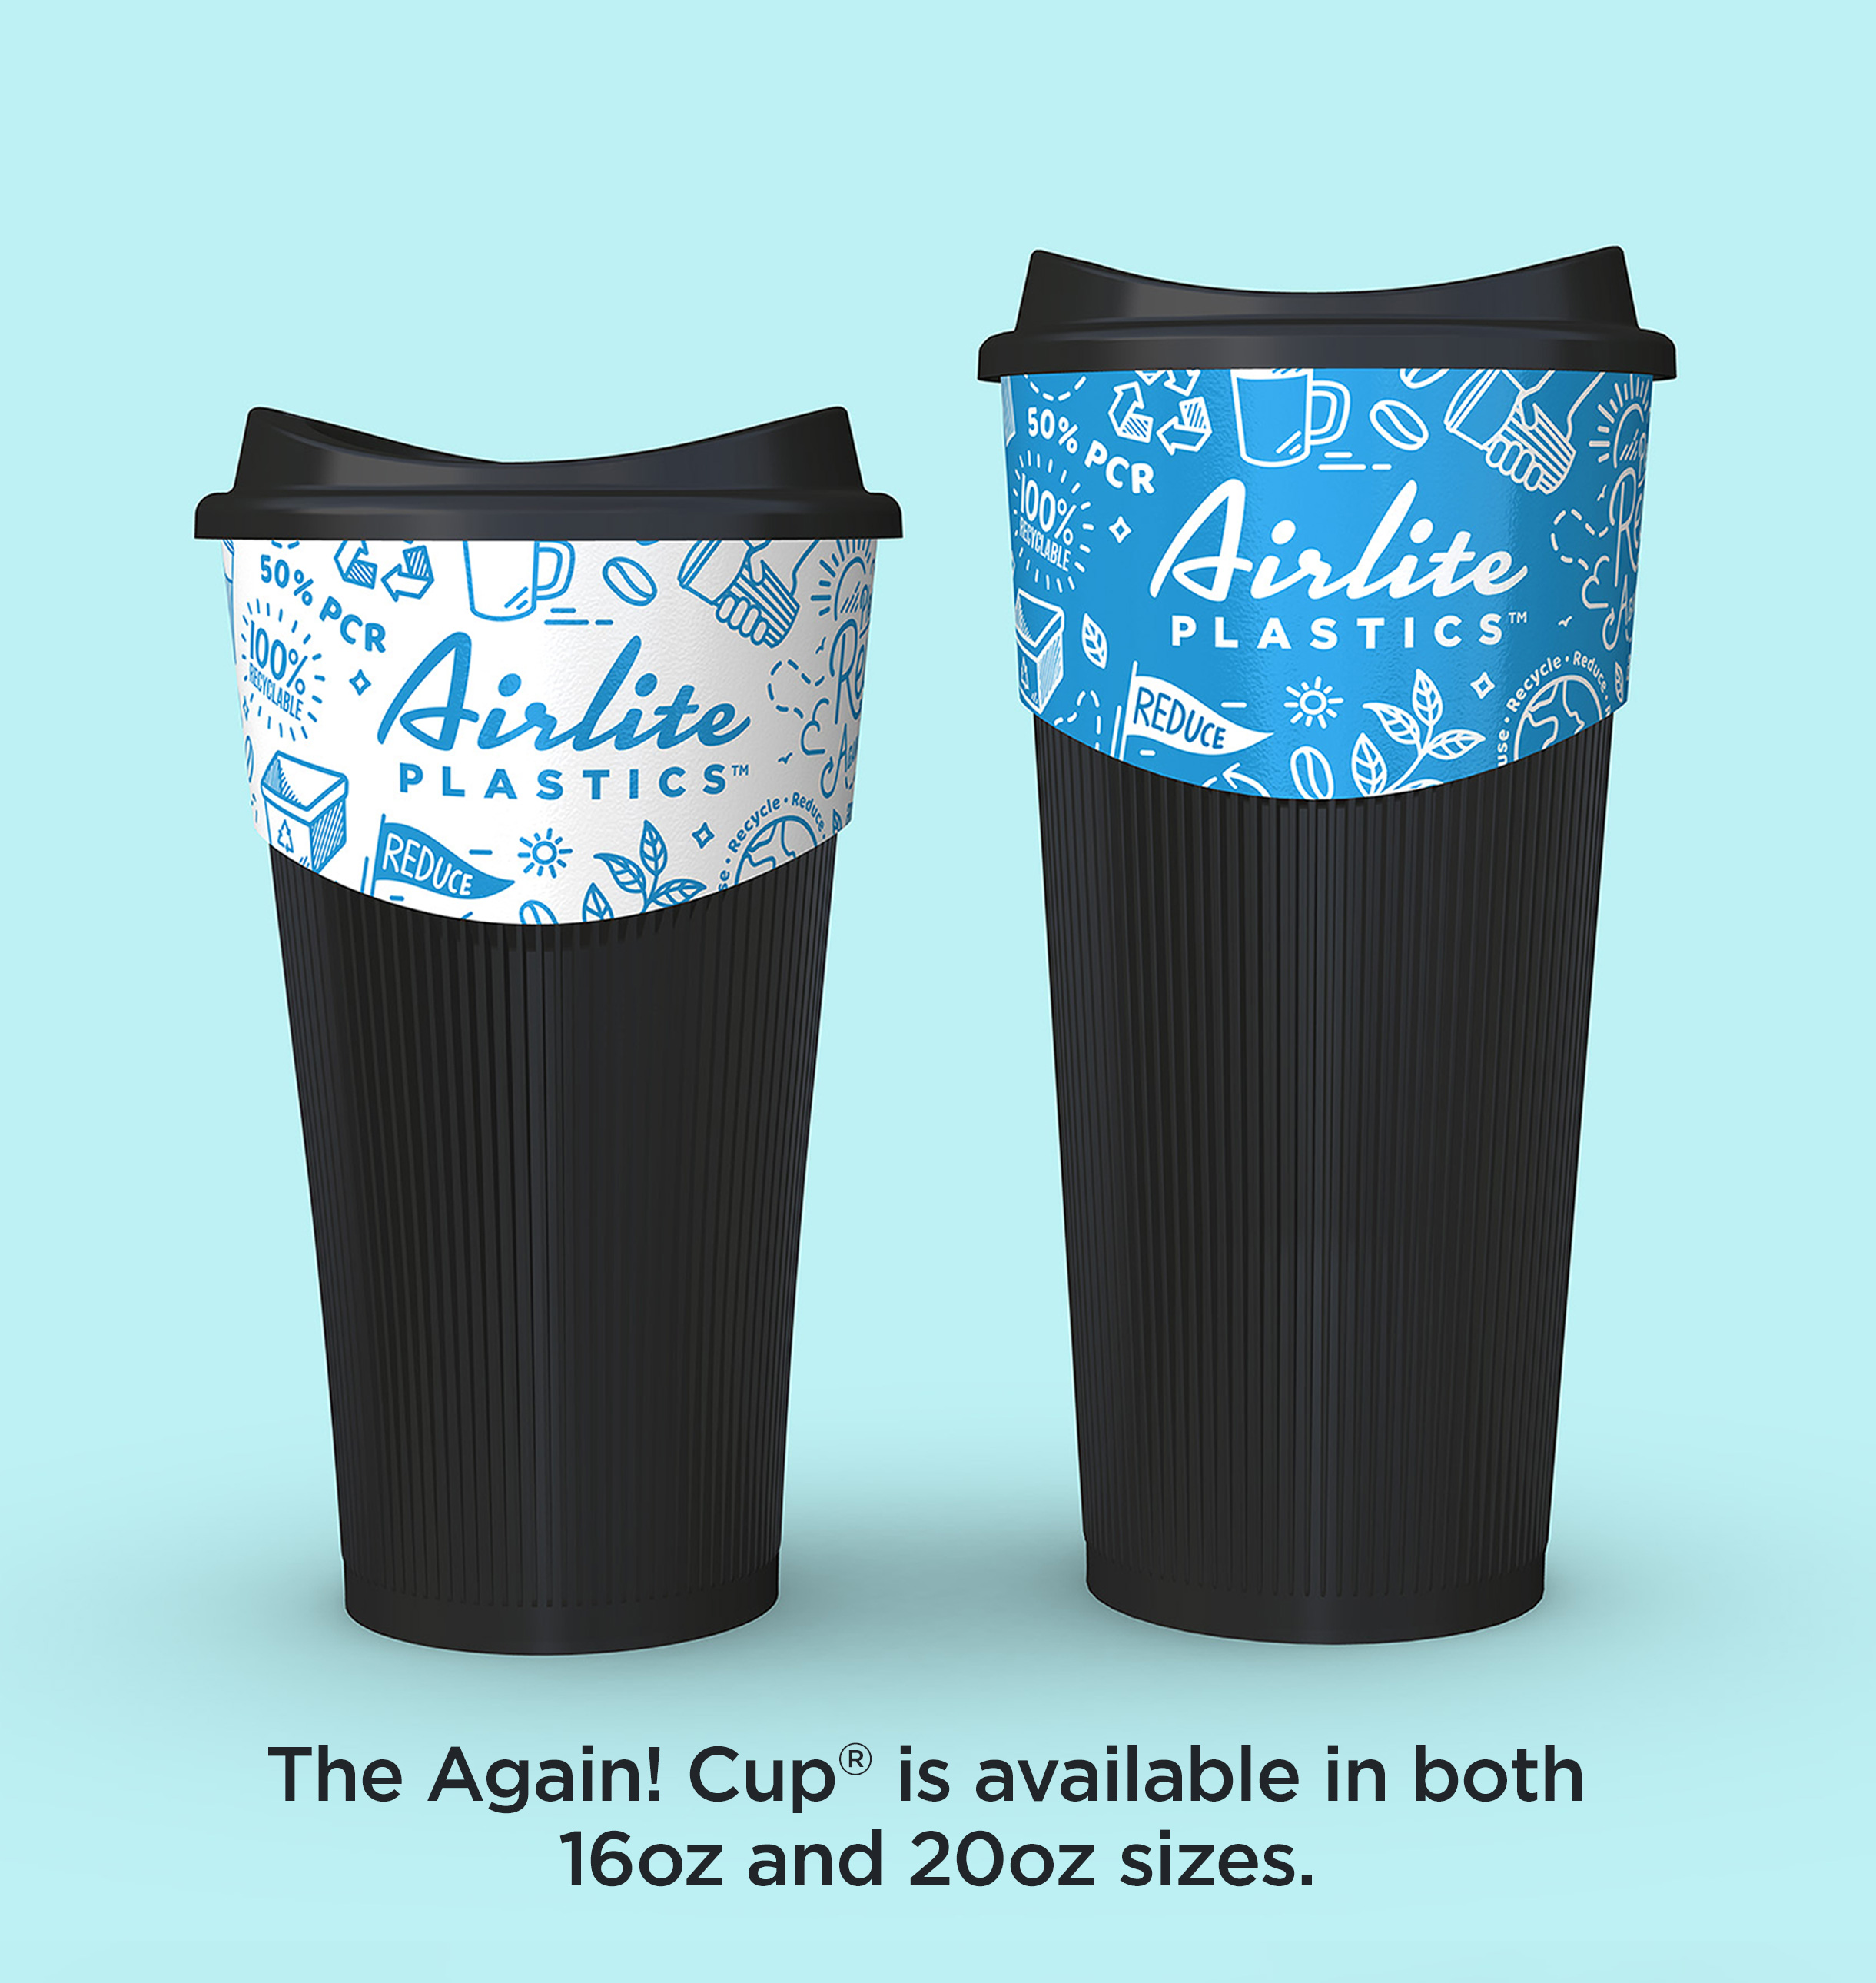 The Again! Cup® is available in both 16oz and 20oz sizes.